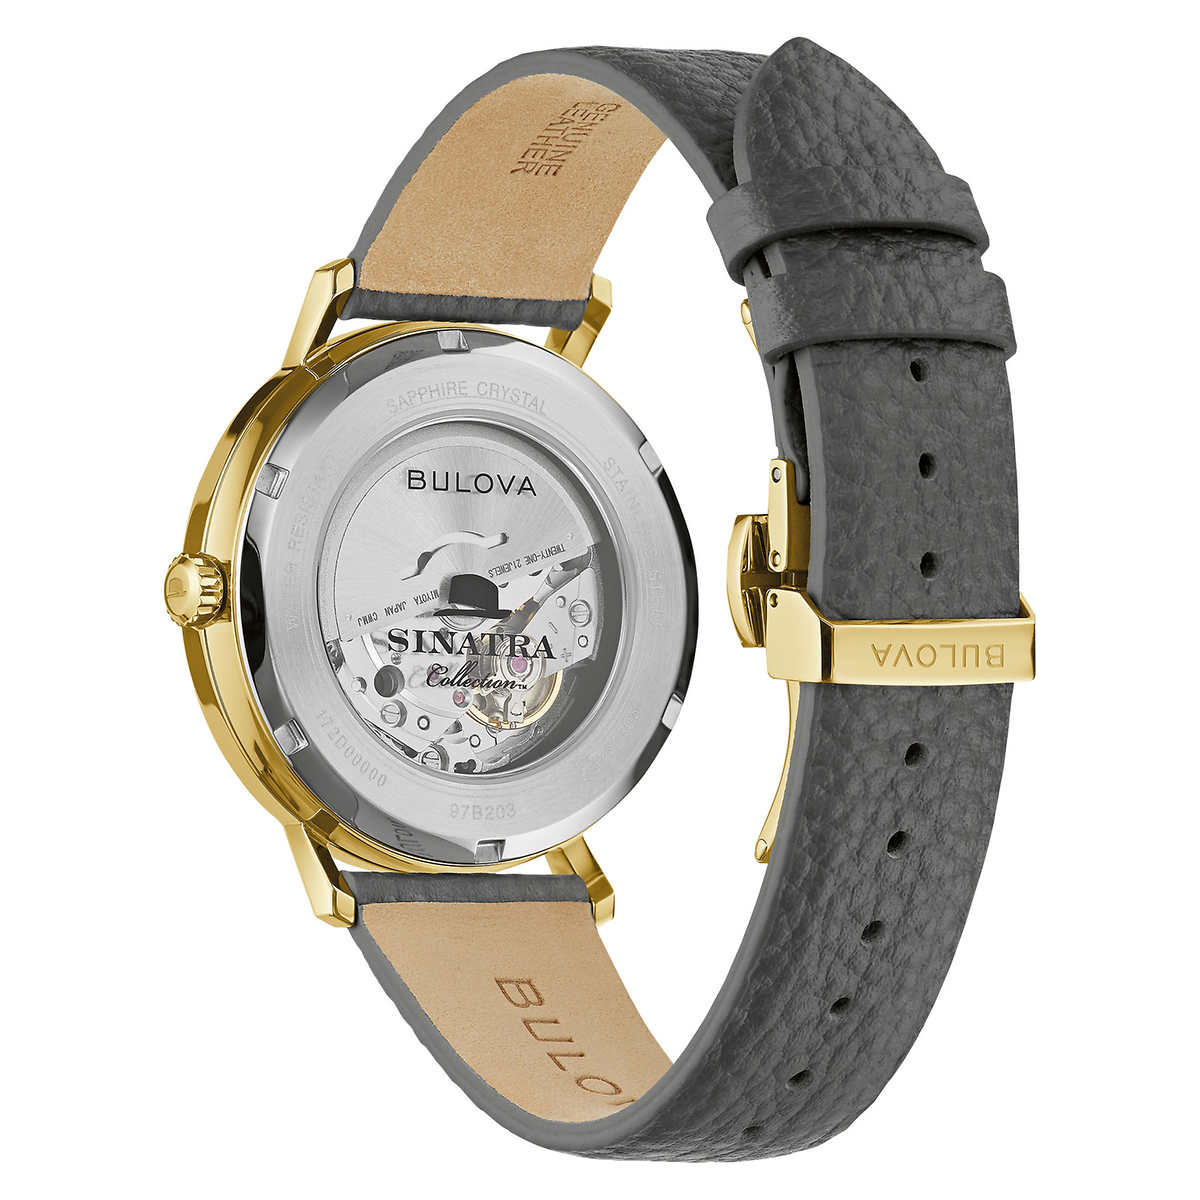 Bulova Frank Sinatra Collection - “FLY ME TO THE MOON” - Automatique